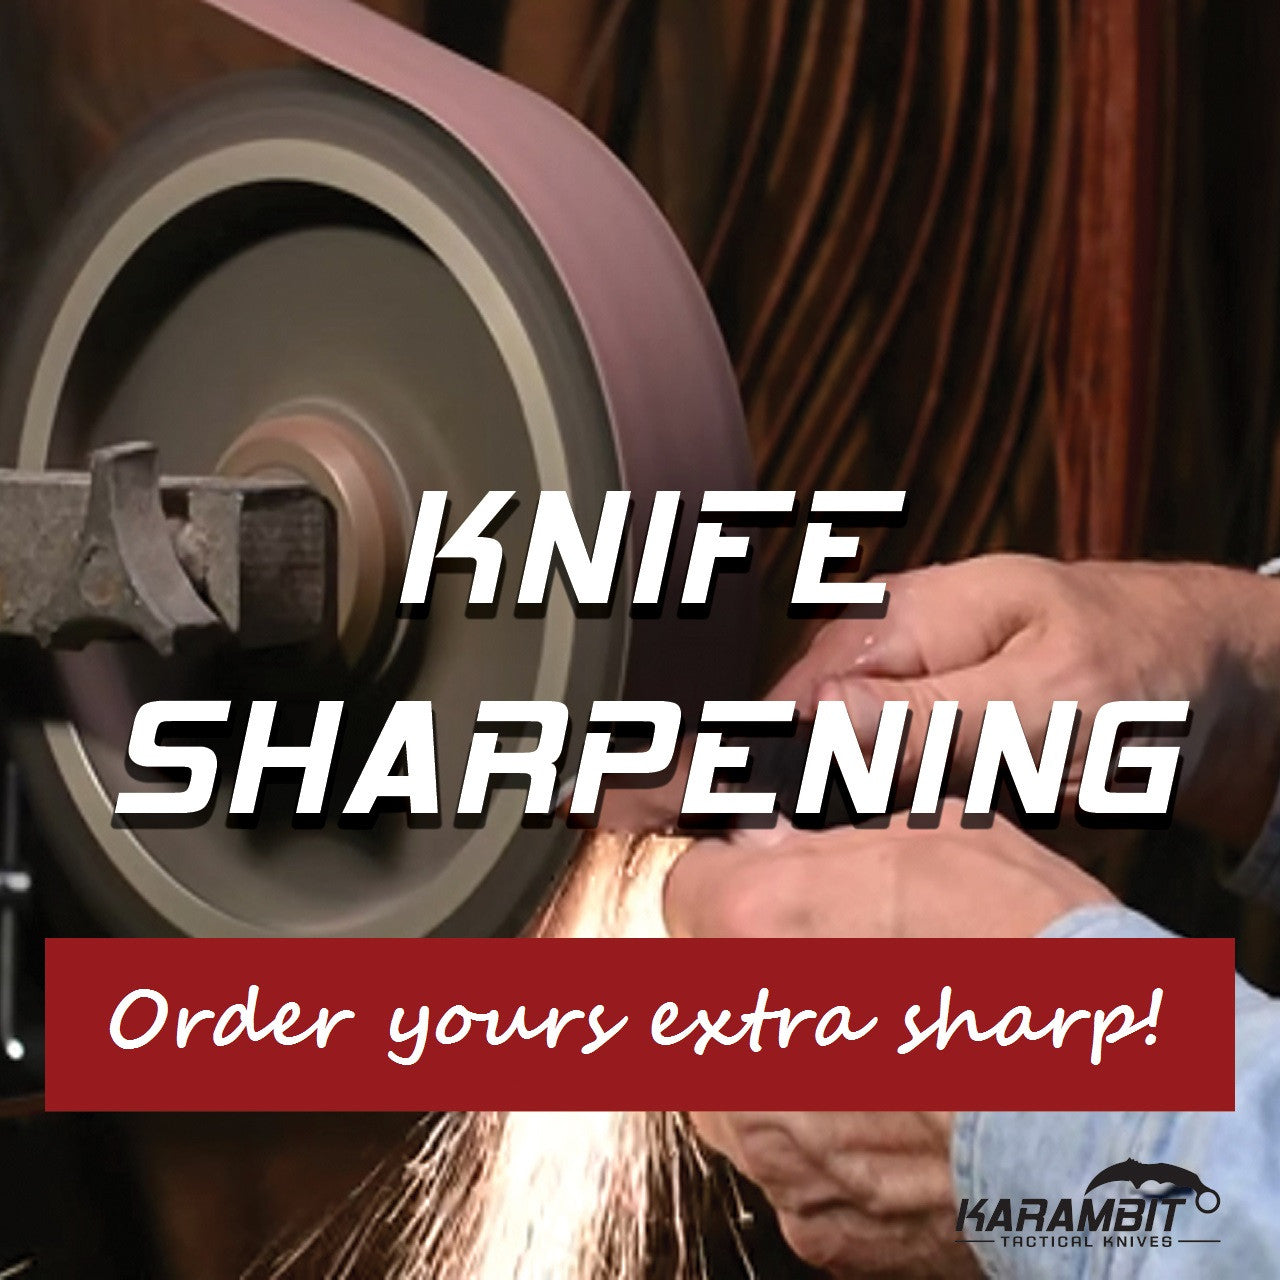 Can We Add Professional Knife Sharpening Services To Your Order Today? (KnifeSharpeningPromo)